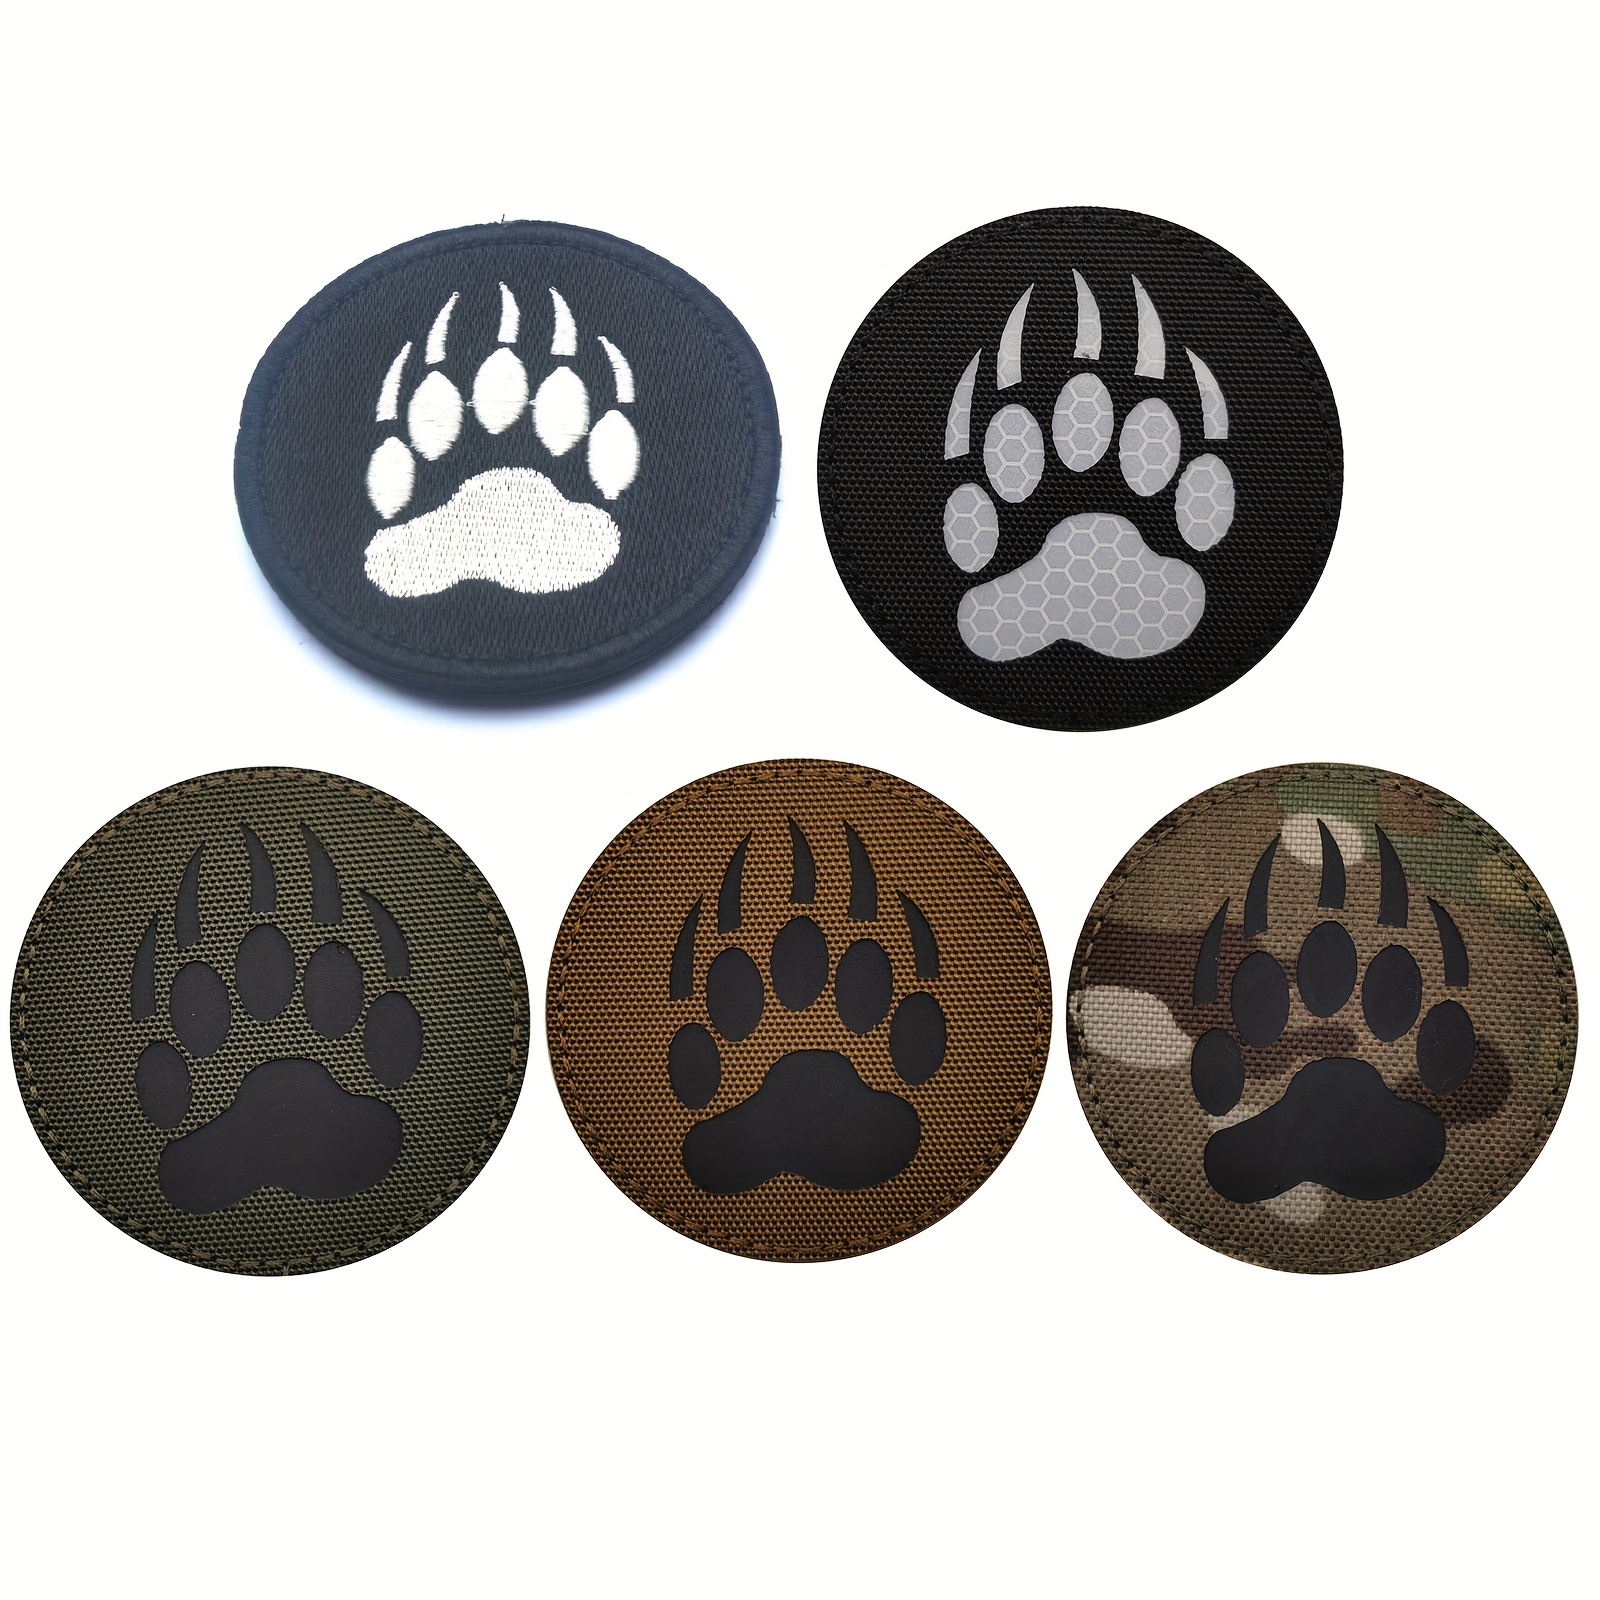 Bear and Claws Patch, Large Animal Patches for Jackets